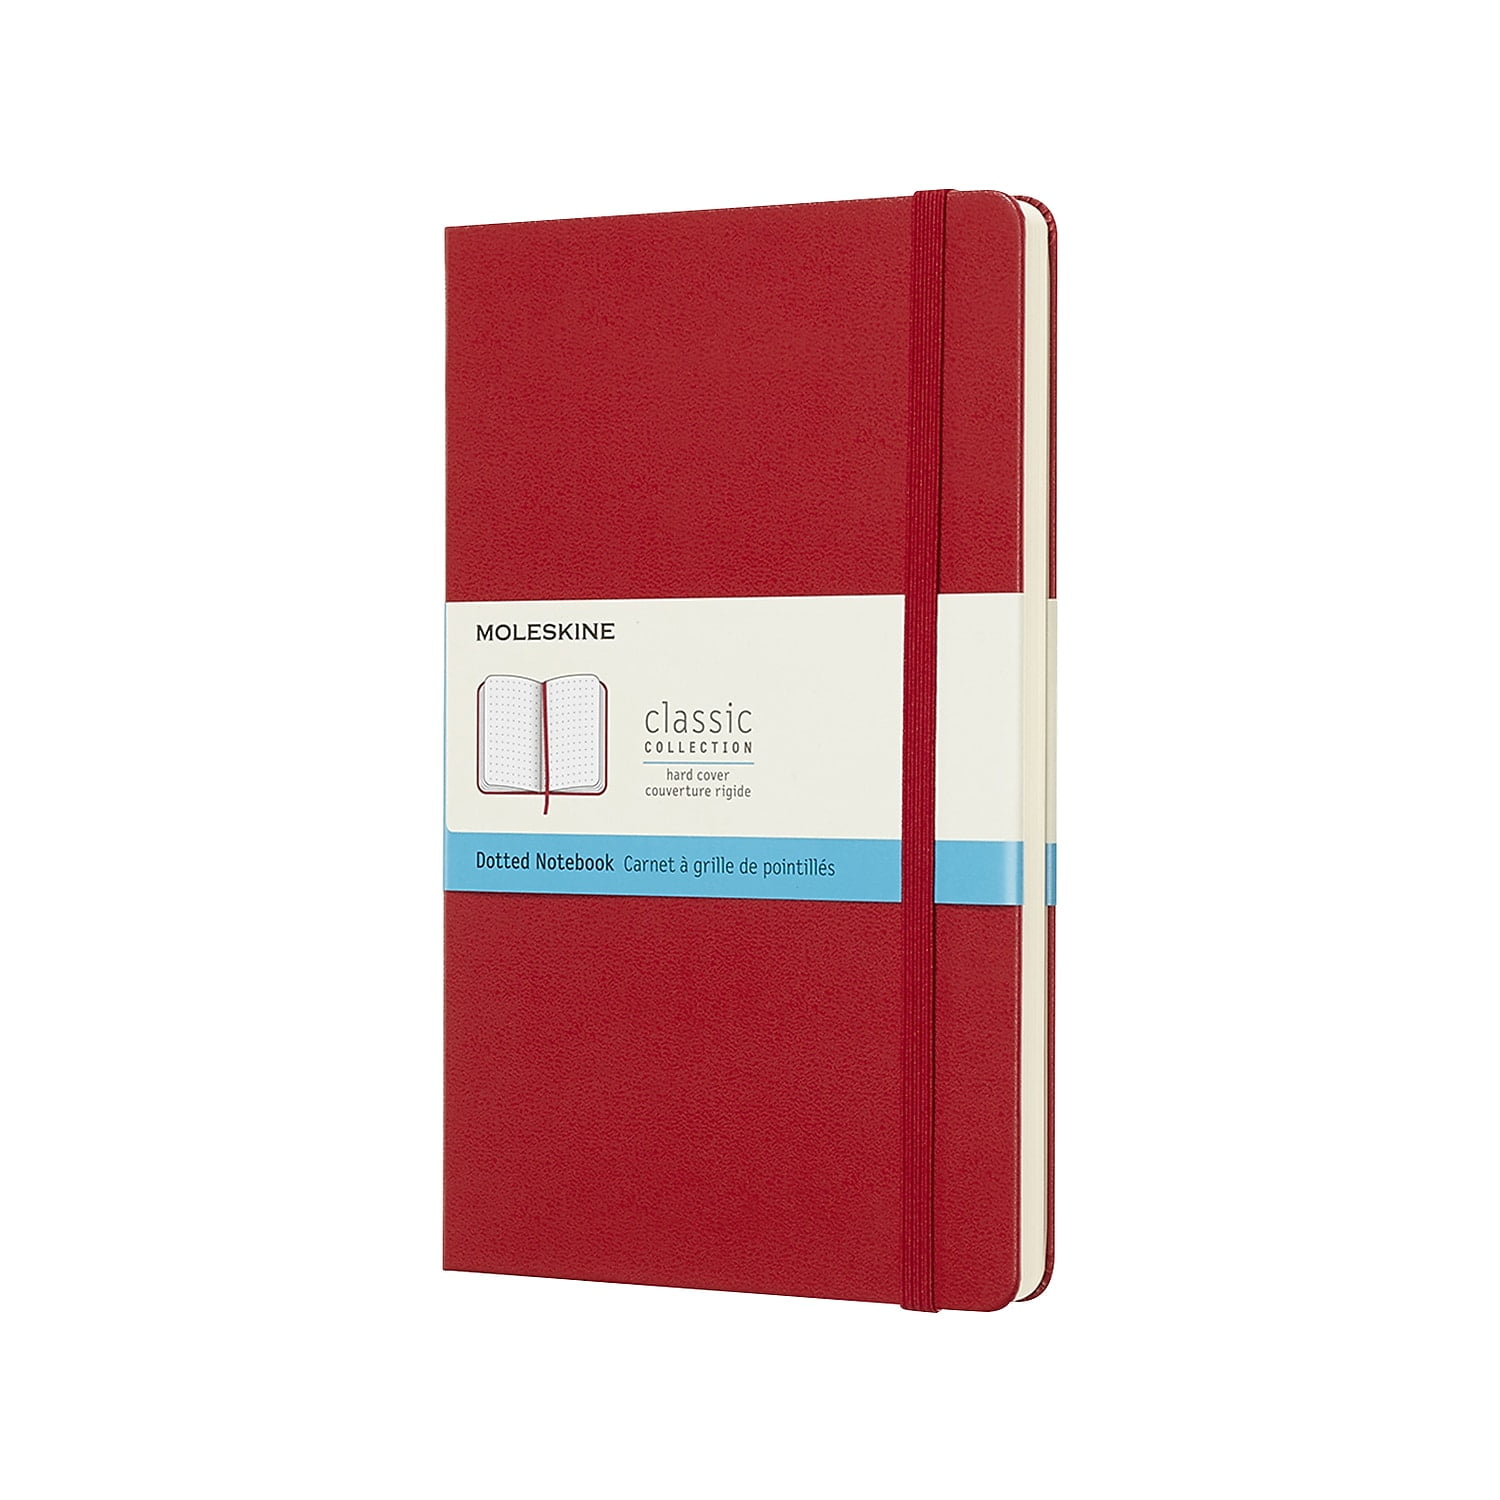  Red Co. 5 x 7 inch Journal/Notebook Refill Paper Book with 240  Lined Pages : Office Products